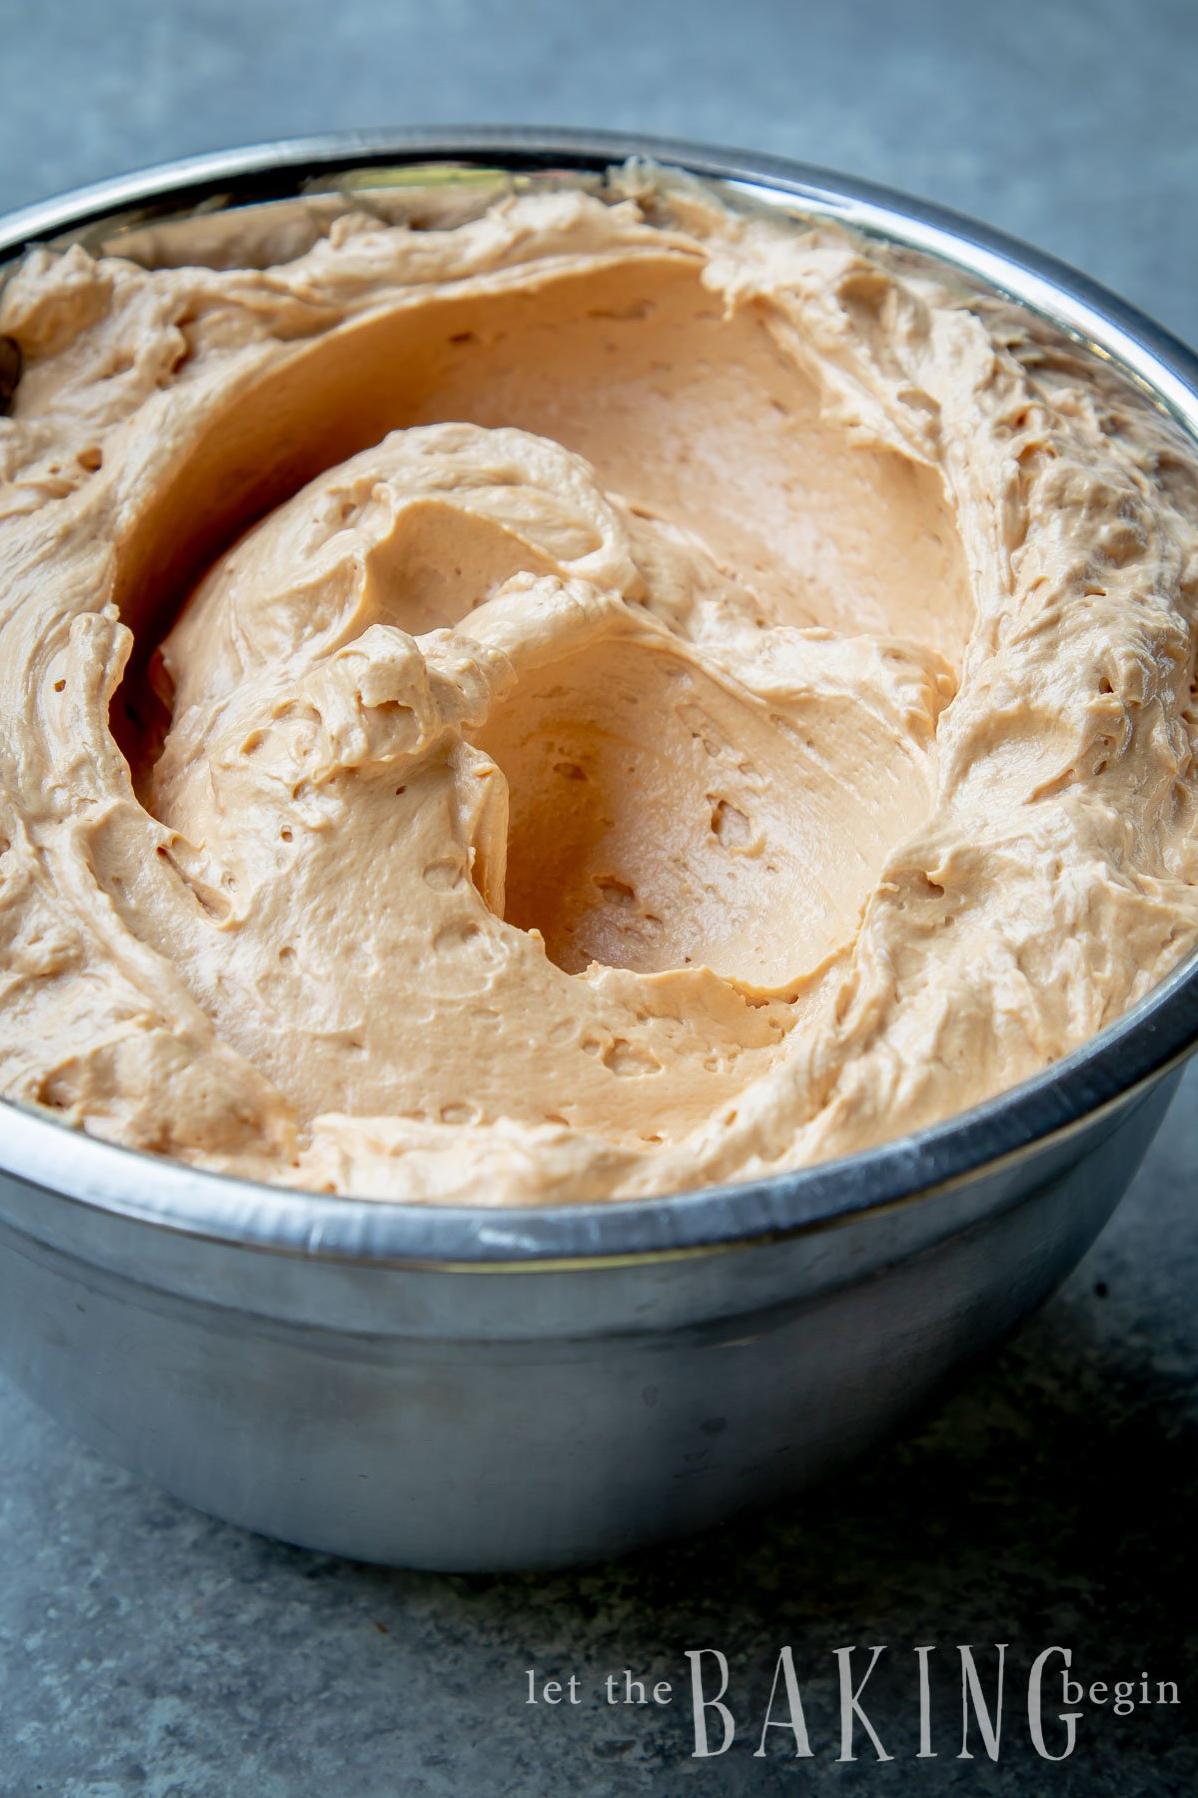  Behold the silky and decadent dulce de leche icing!